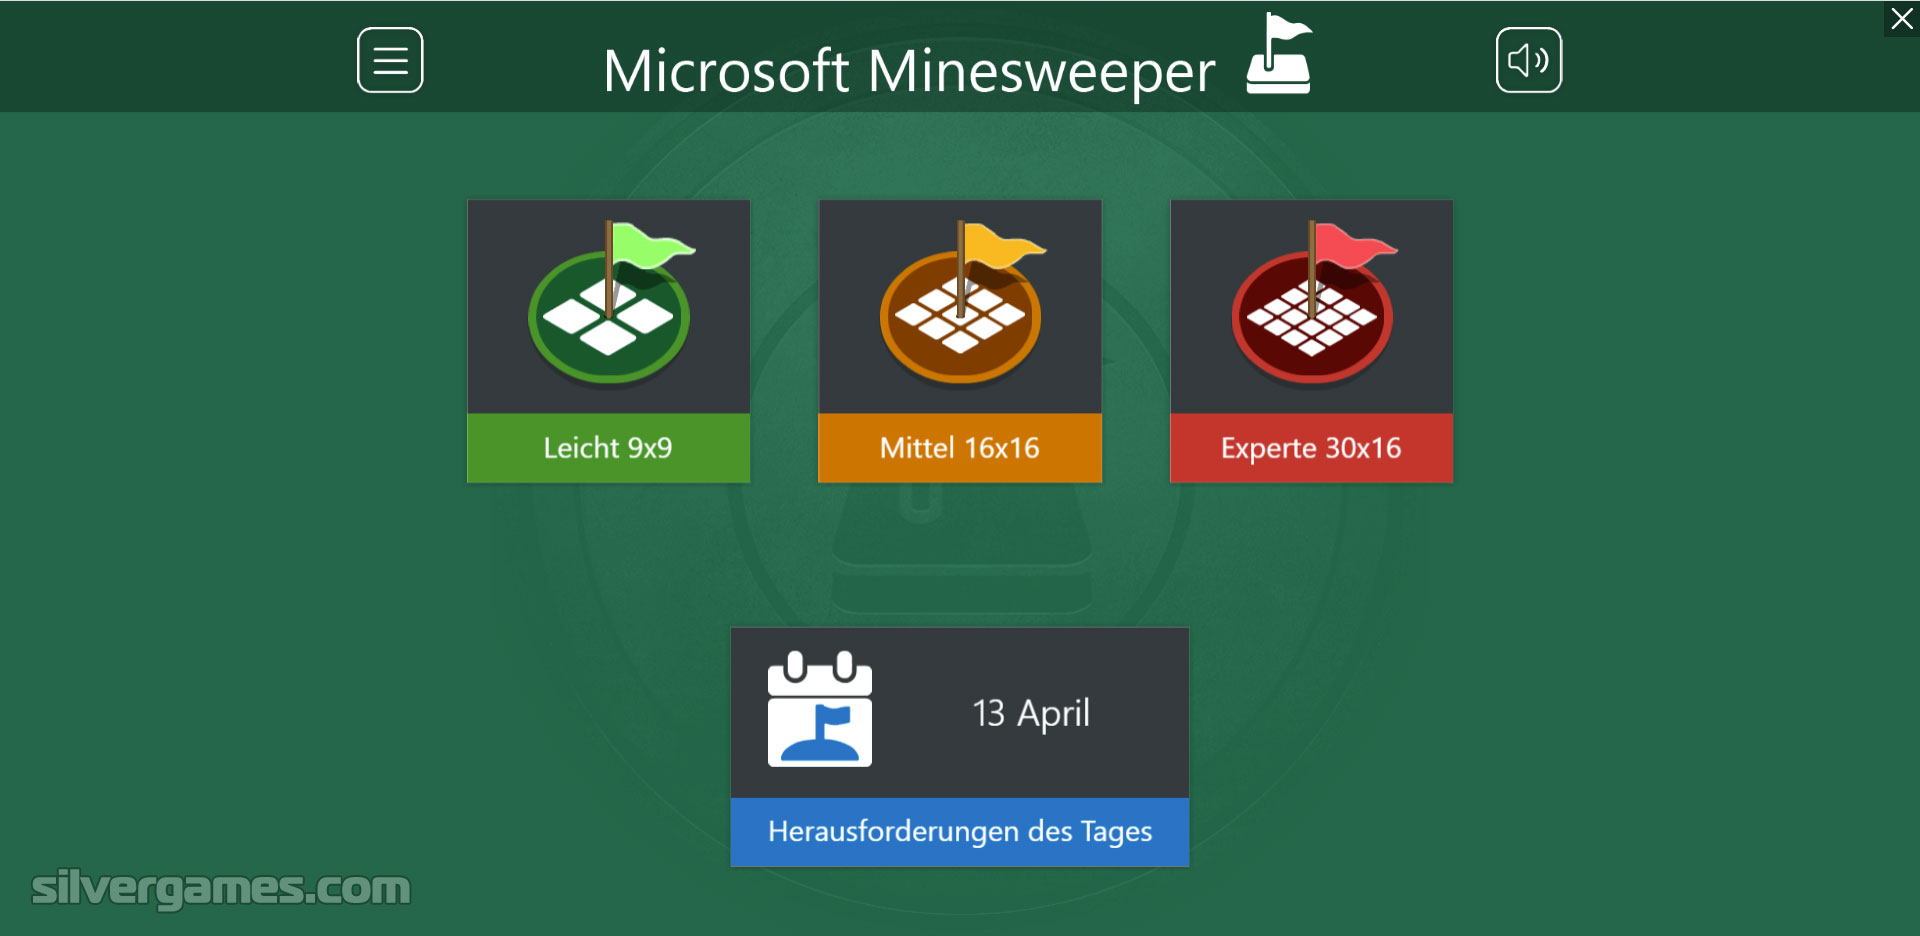 microsoft minesweeper crashed and wont load